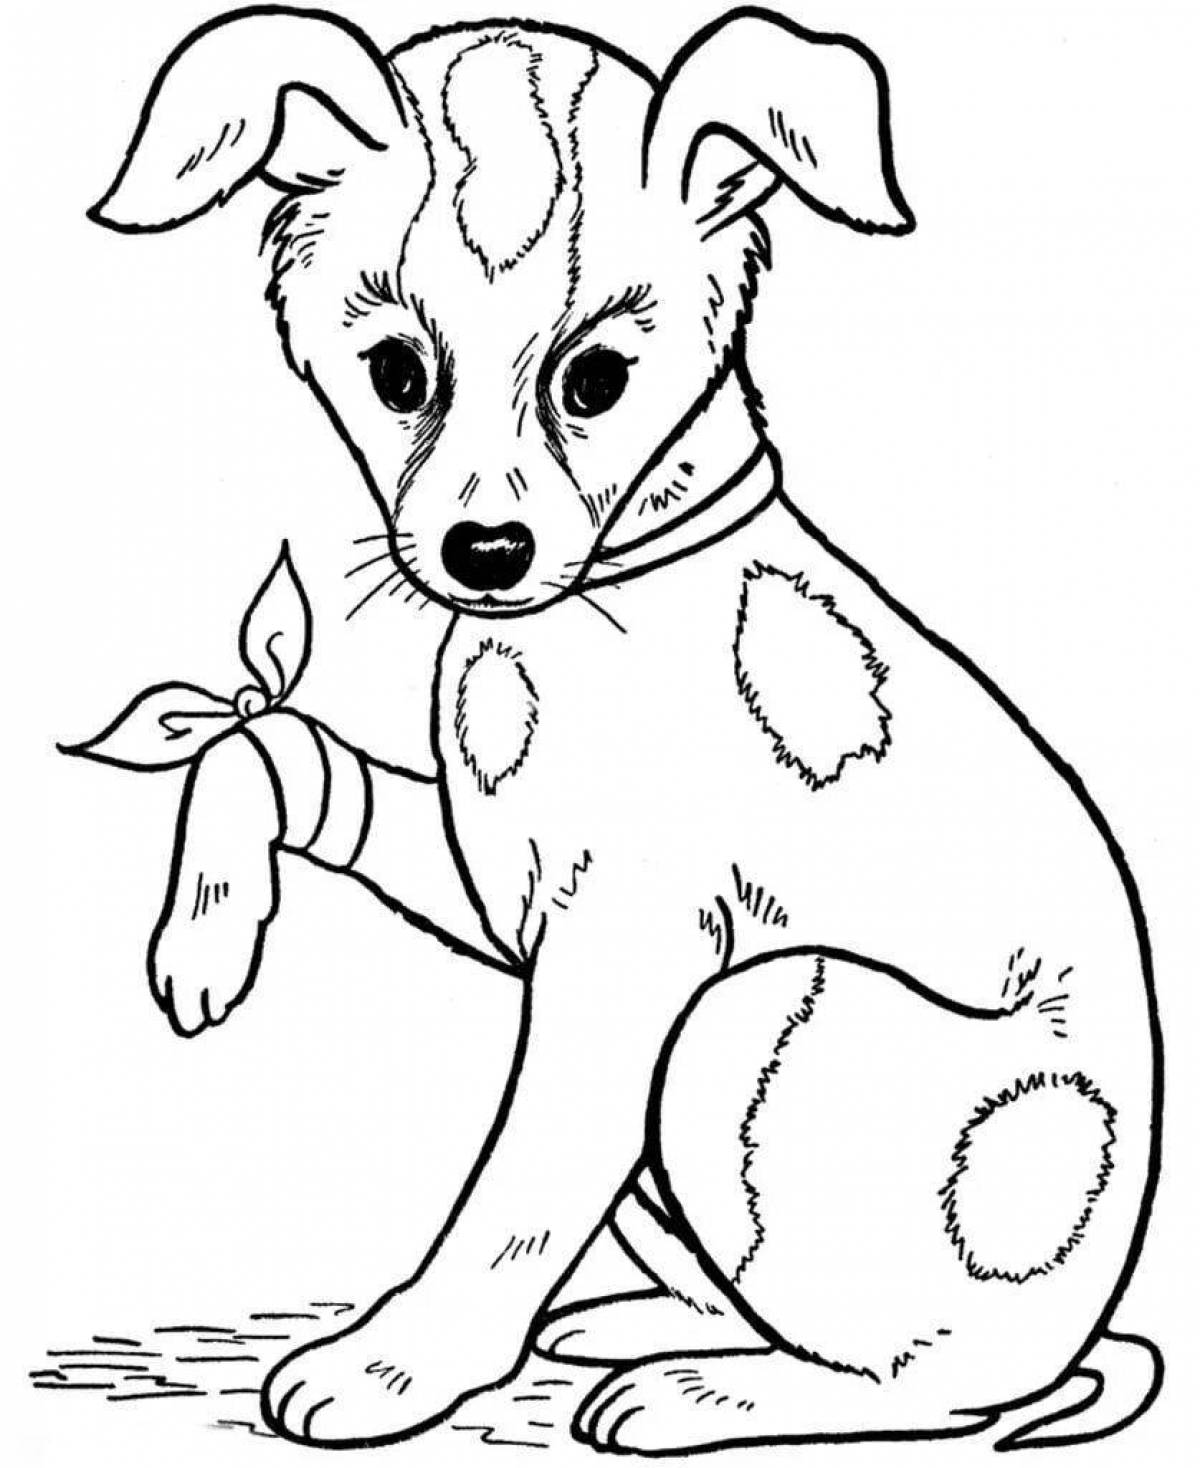 Snuggly coloring page dog small